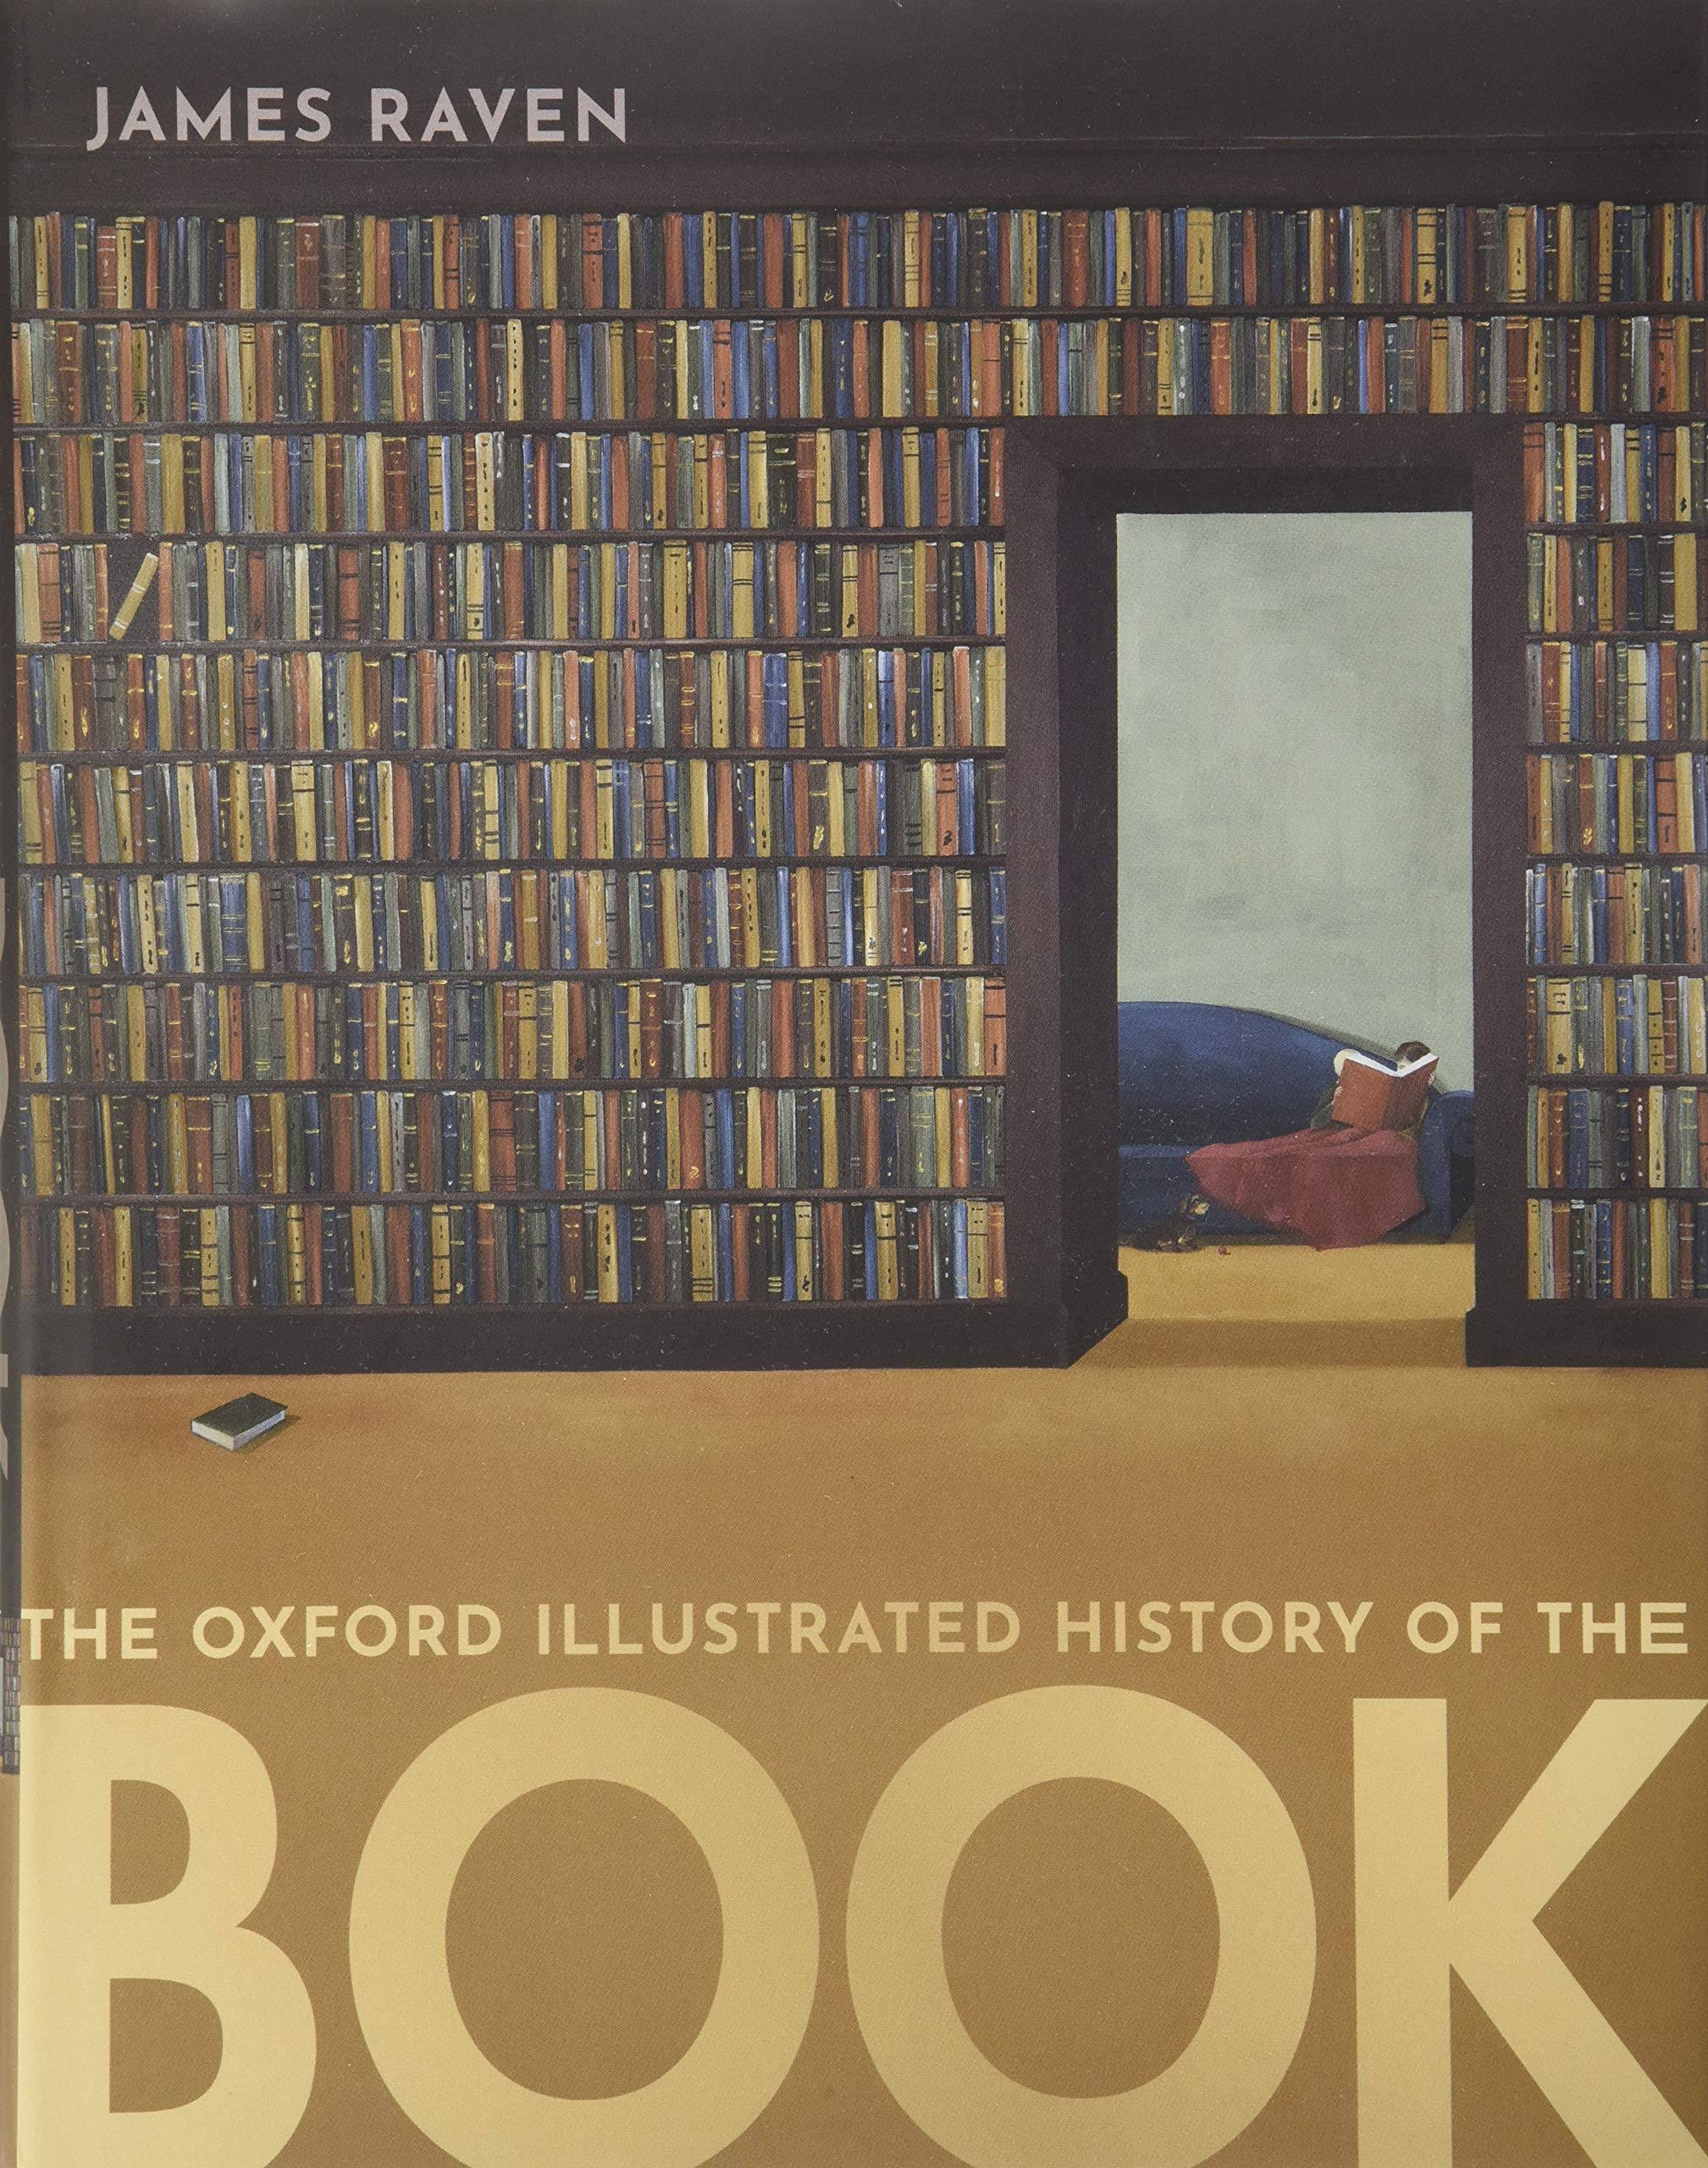 The Oxford Illustrated History of the Book by James Raven